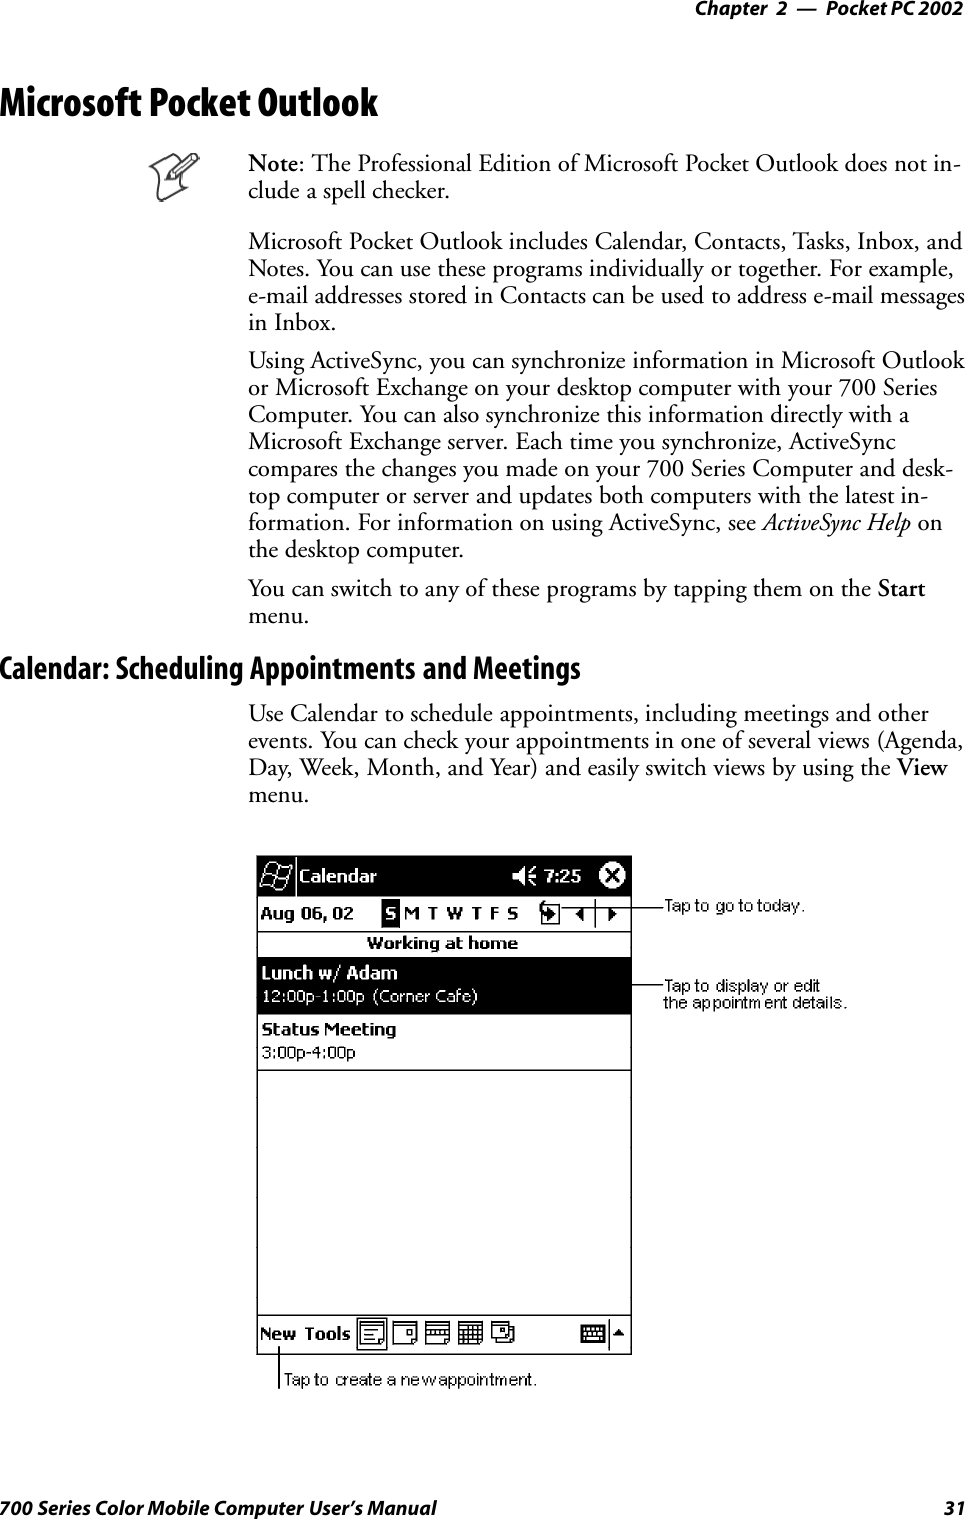 Pocket PC 2002—Chapter 231700 Series Color Mobile Computer User’s ManualMicrosoft Pocket OutlookNote: The Professional Edition of Microsoft Pocket Outlook does not in-clude a spell checker.Microsoft Pocket Outlook includes Calendar, Contacts, Tasks, Inbox, andNotes. You can use these programs individually or together. For example,e-mail addresses stored in Contacts can be used to address e-mail messagesin Inbox.Using ActiveSync, you can synchronize information in Microsoft Outlookor Microsoft Exchange on your desktop computer with your 700 SeriesComputer. You can also synchronize this information directly with aMicrosoft Exchange server. Each time you synchronize, ActiveSynccompares the changes you made on your 700 Series Computer and desk-top computer or server and updates both computers with the latest in-formation. For information on using ActiveSync, see ActiveSync Help onthe desktop computer.You can switch to any of these programs by tapping them on the Startmenu.Calendar: Scheduling Appointments and MeetingsUse Calendar to schedule appointments, including meetings and otherevents. You can check your appointments in one of several views (Agenda,Day, Week, Month, and Year) and easily switch views by using the Viewmenu.